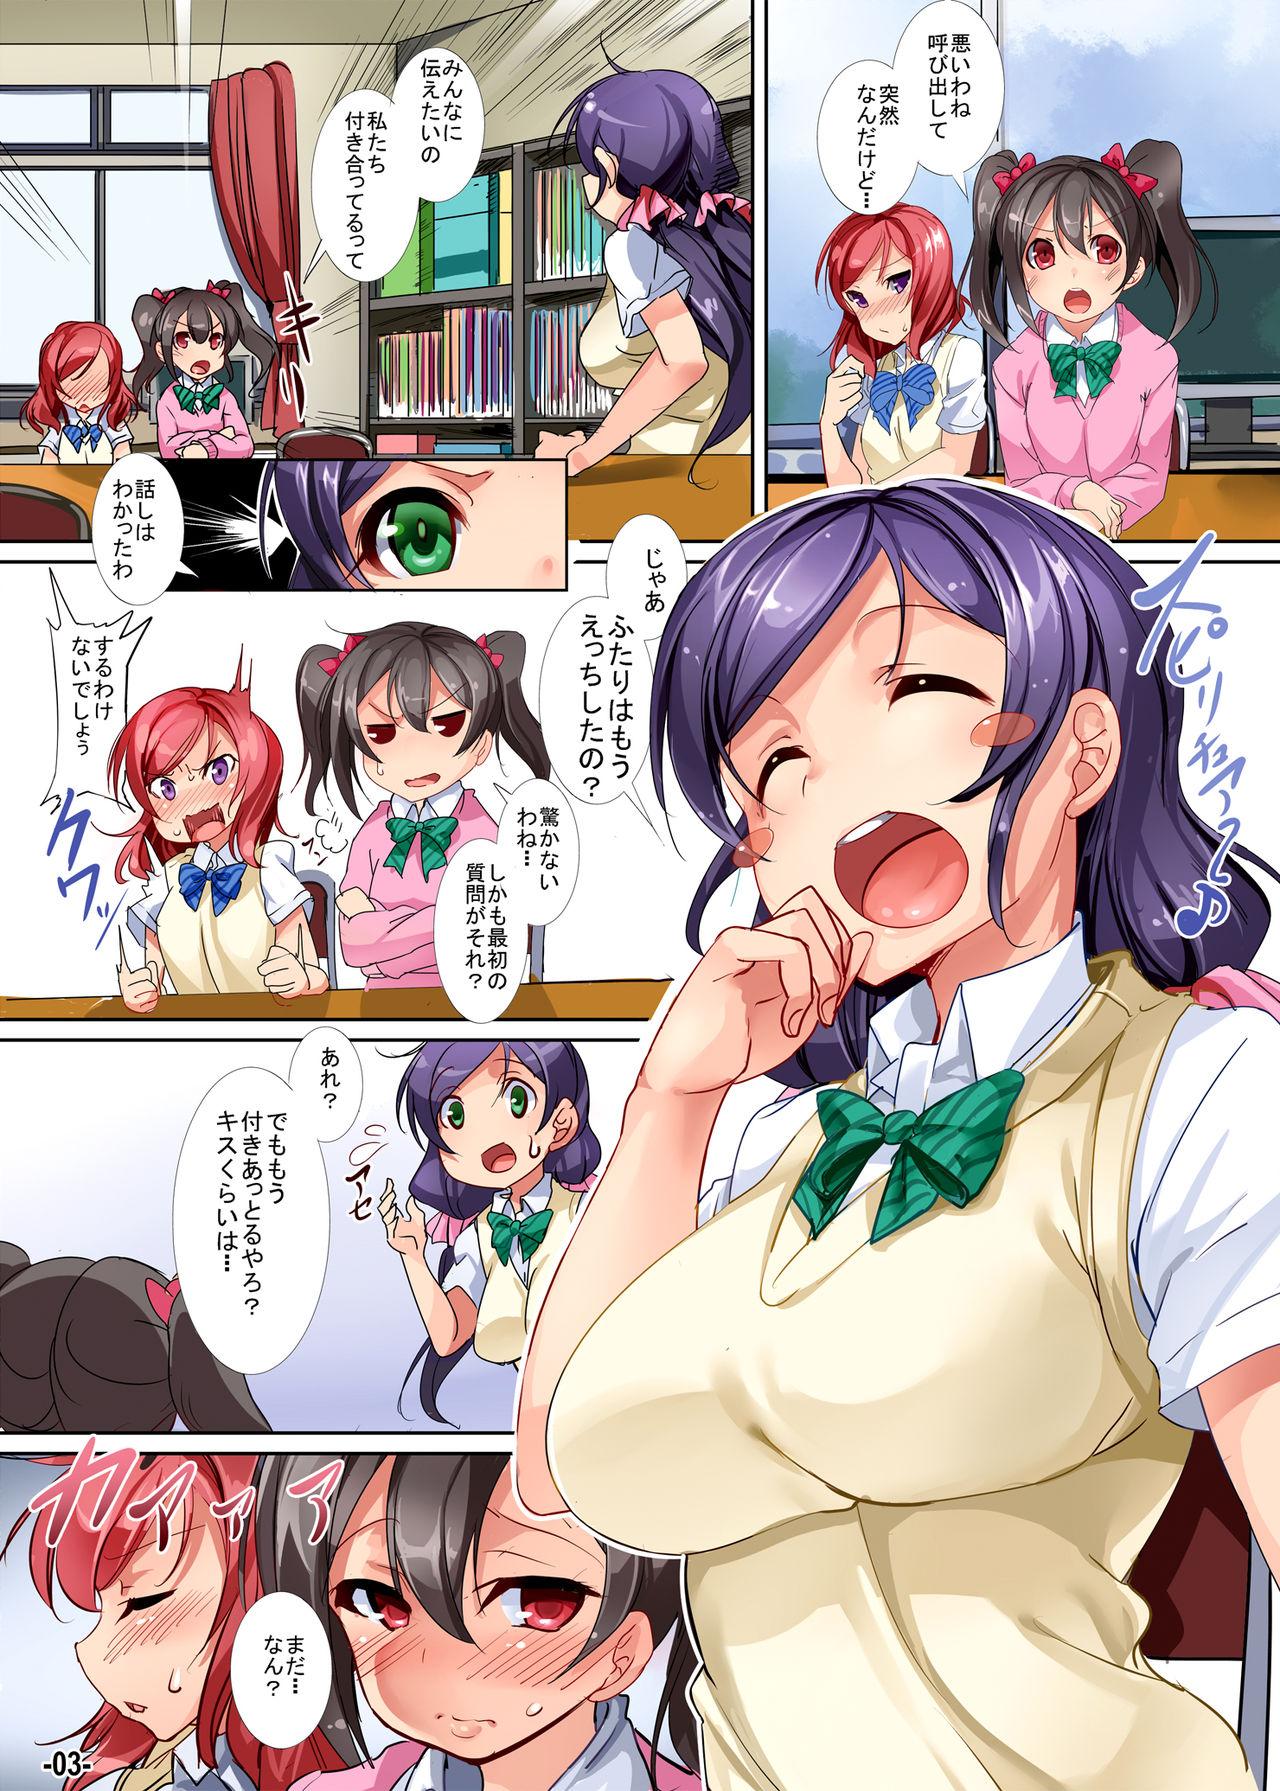 Seduction Yuri Girls Project - Love live Cum Swallowing - Page 3